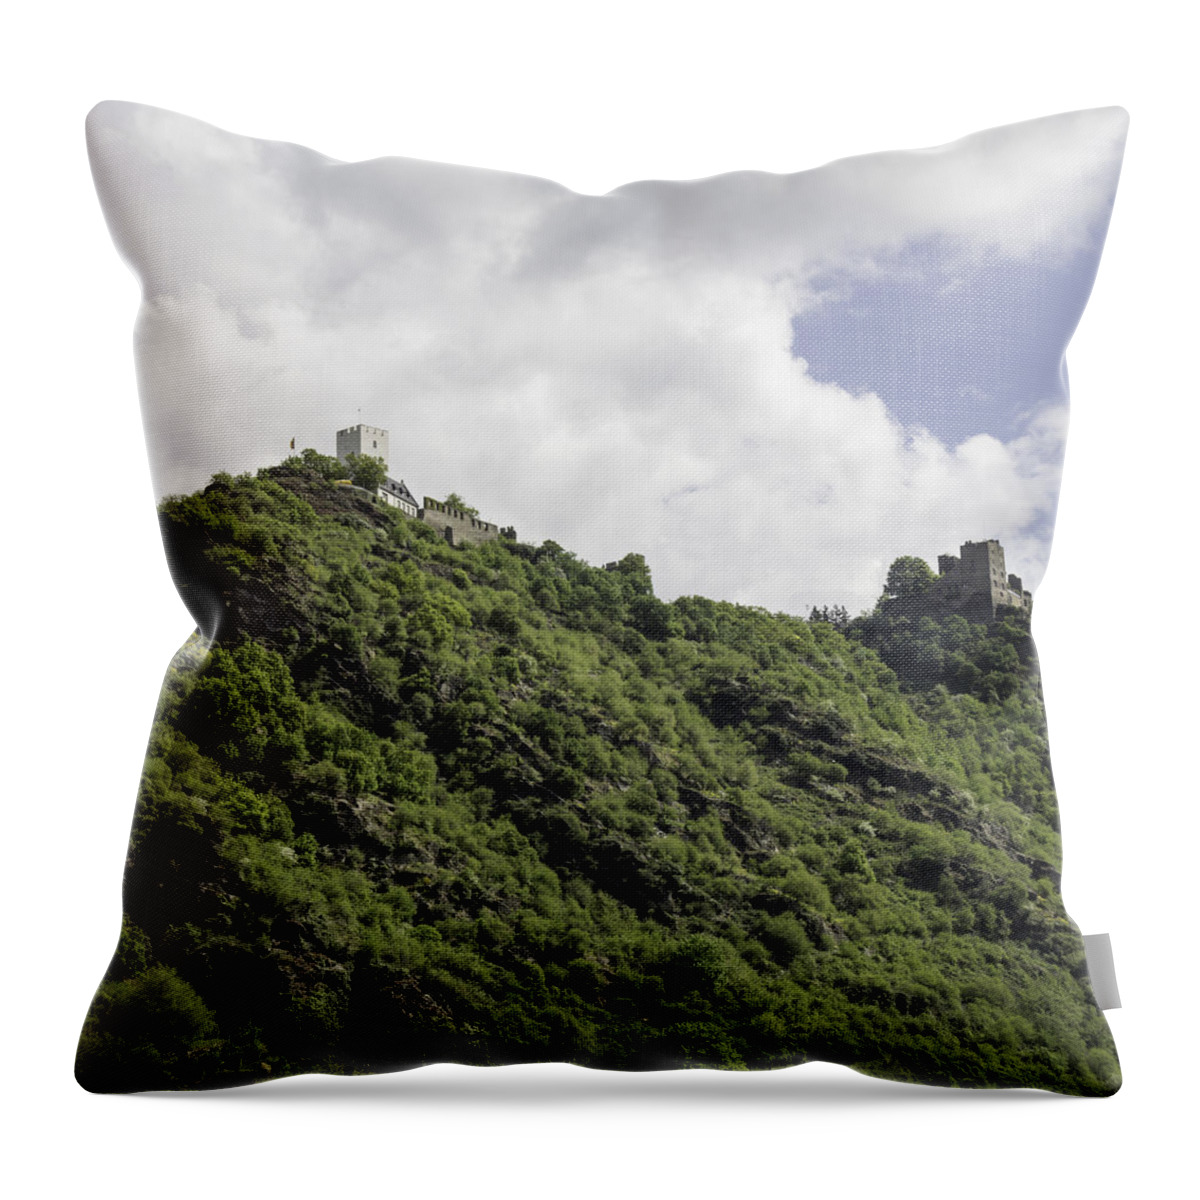 Angry Brother Castles Throw Pillow featuring the photograph The Hostile Brothers Castles #1 by Teresa Mucha